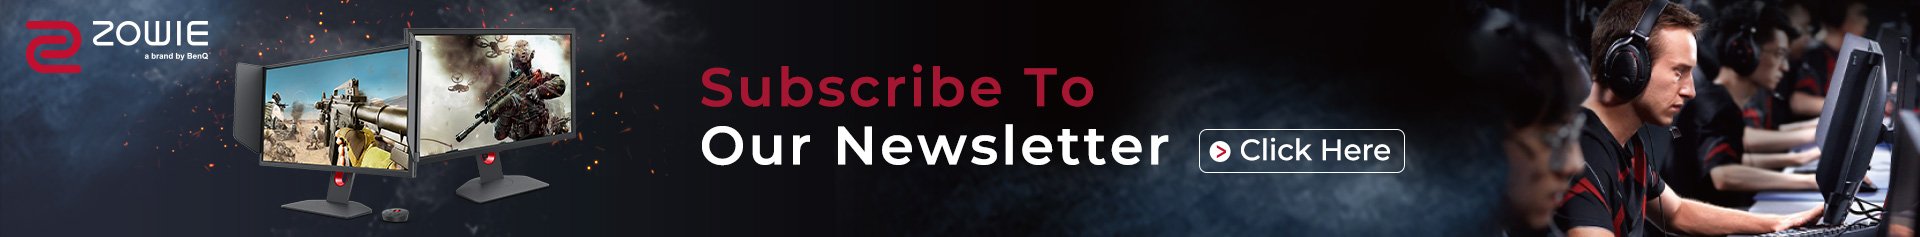 Subscribe to ZOWIE's Newsletters